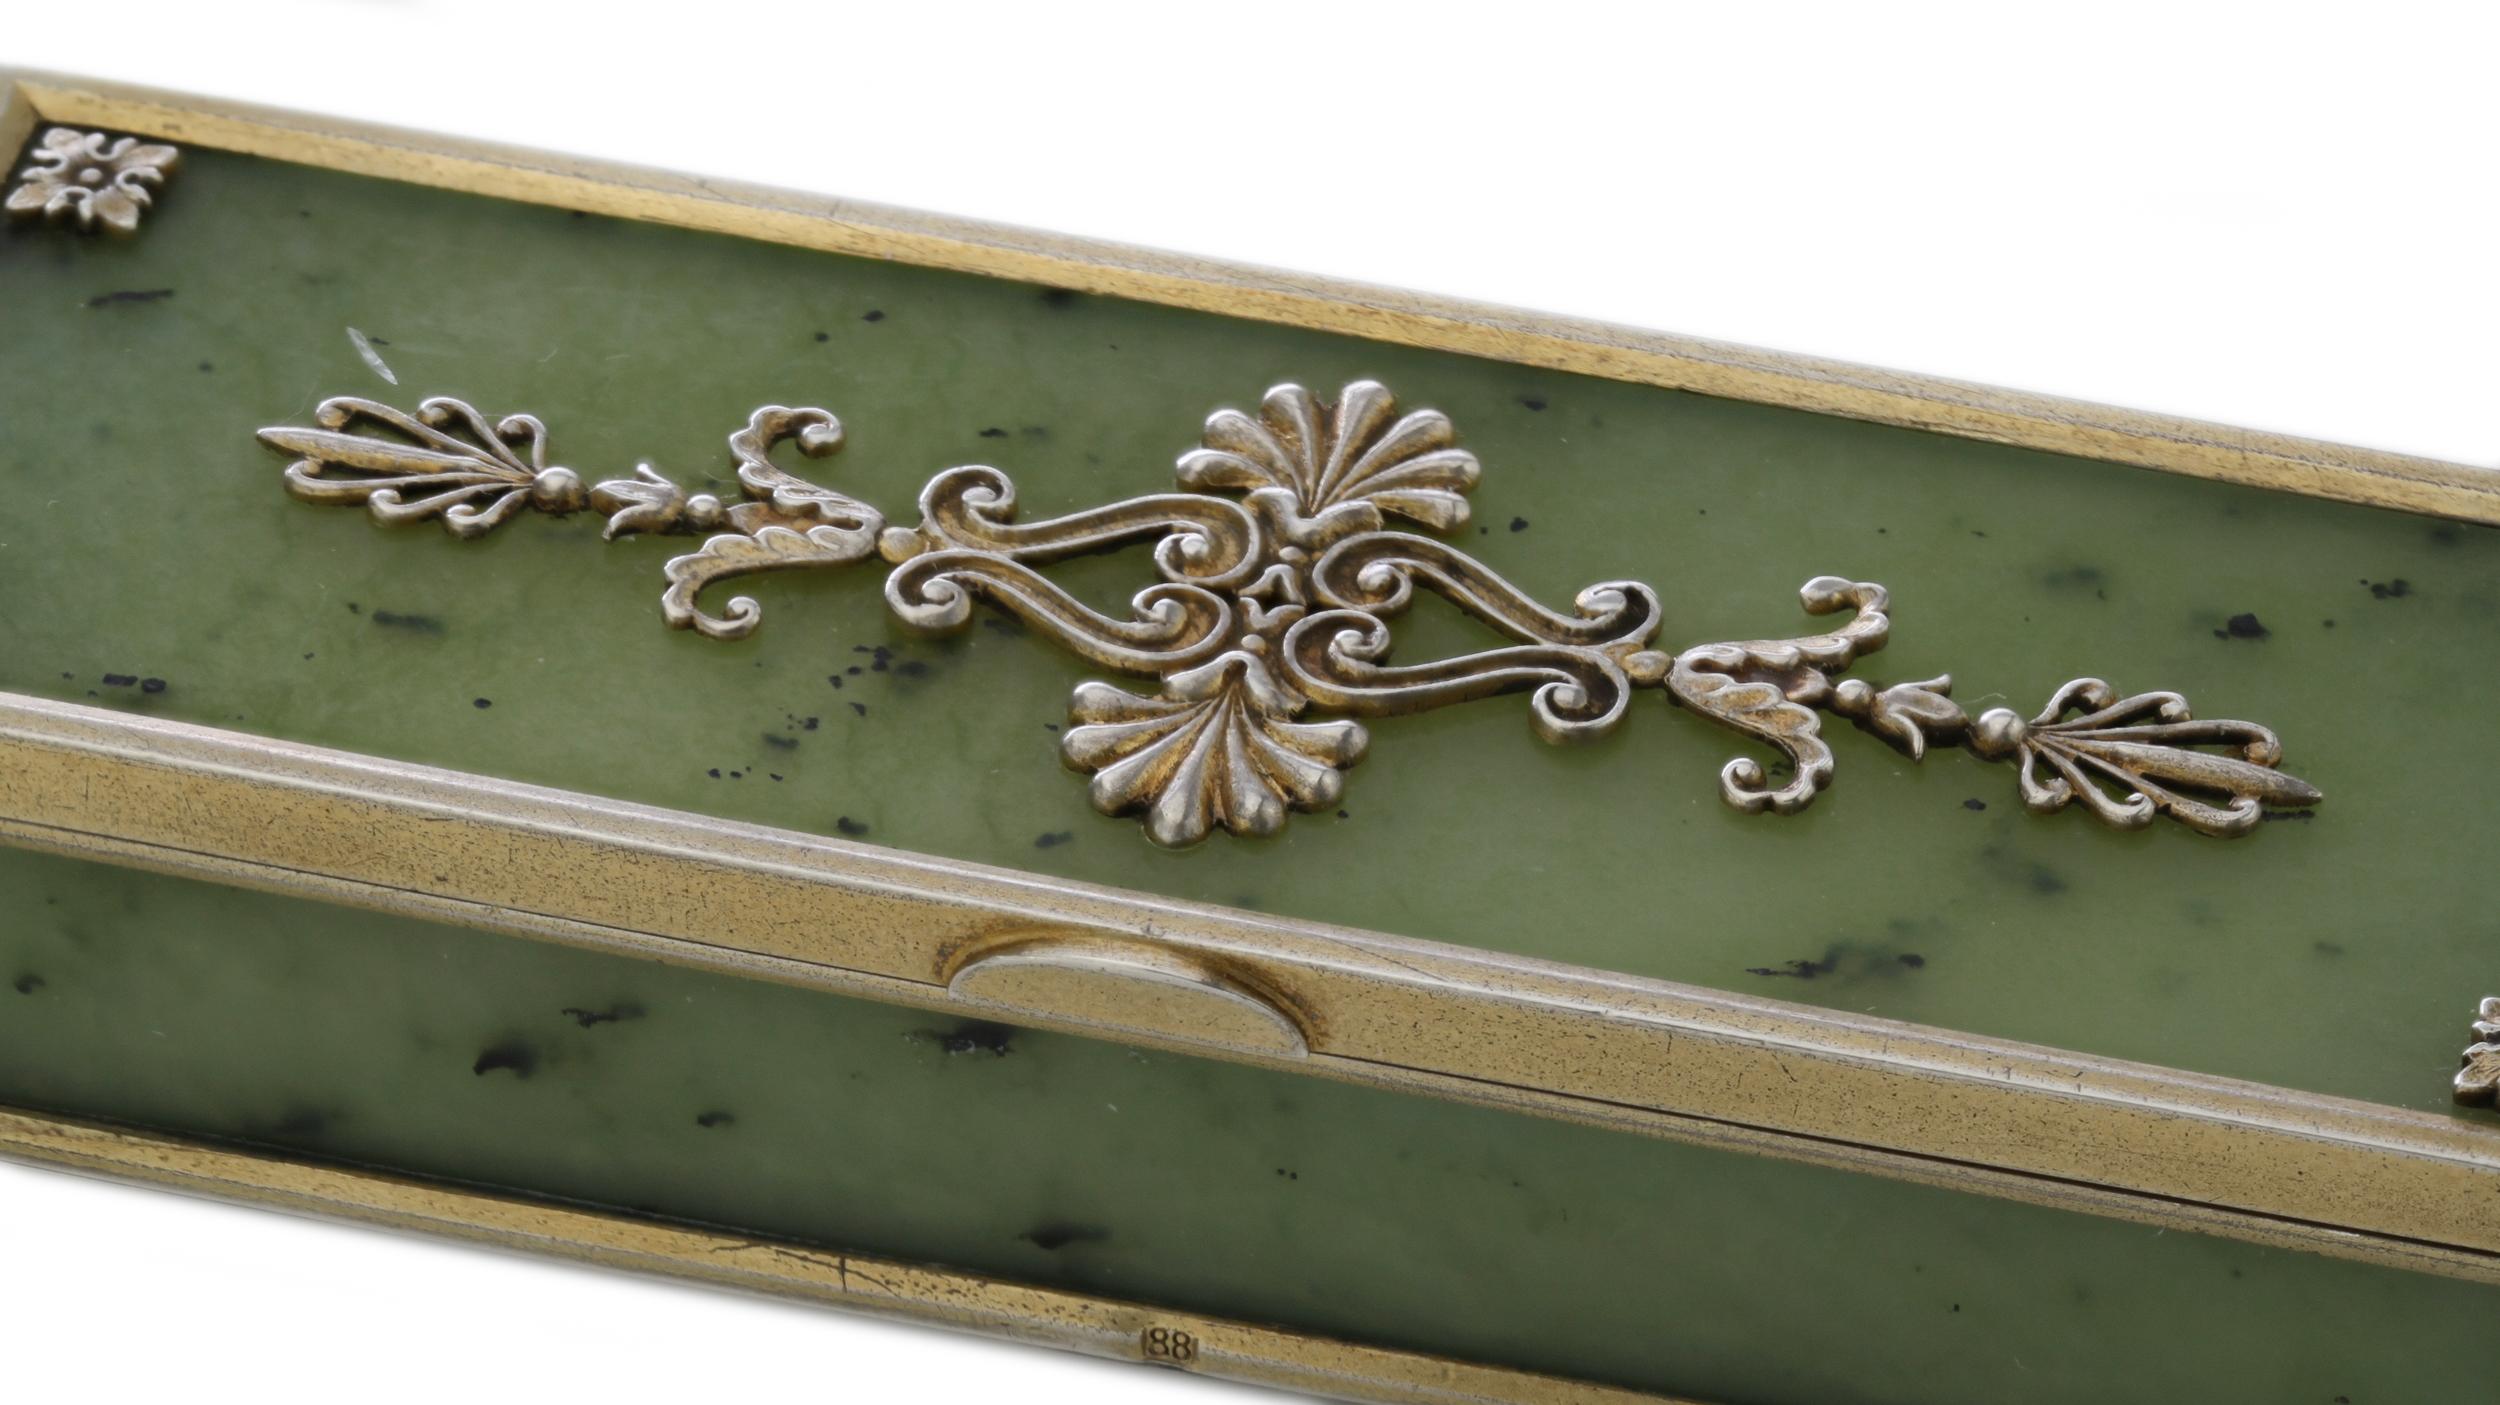 Antique Early 20th Century Russian Faberge Solid Silver-Gilt & Nephrite Box 1899 5